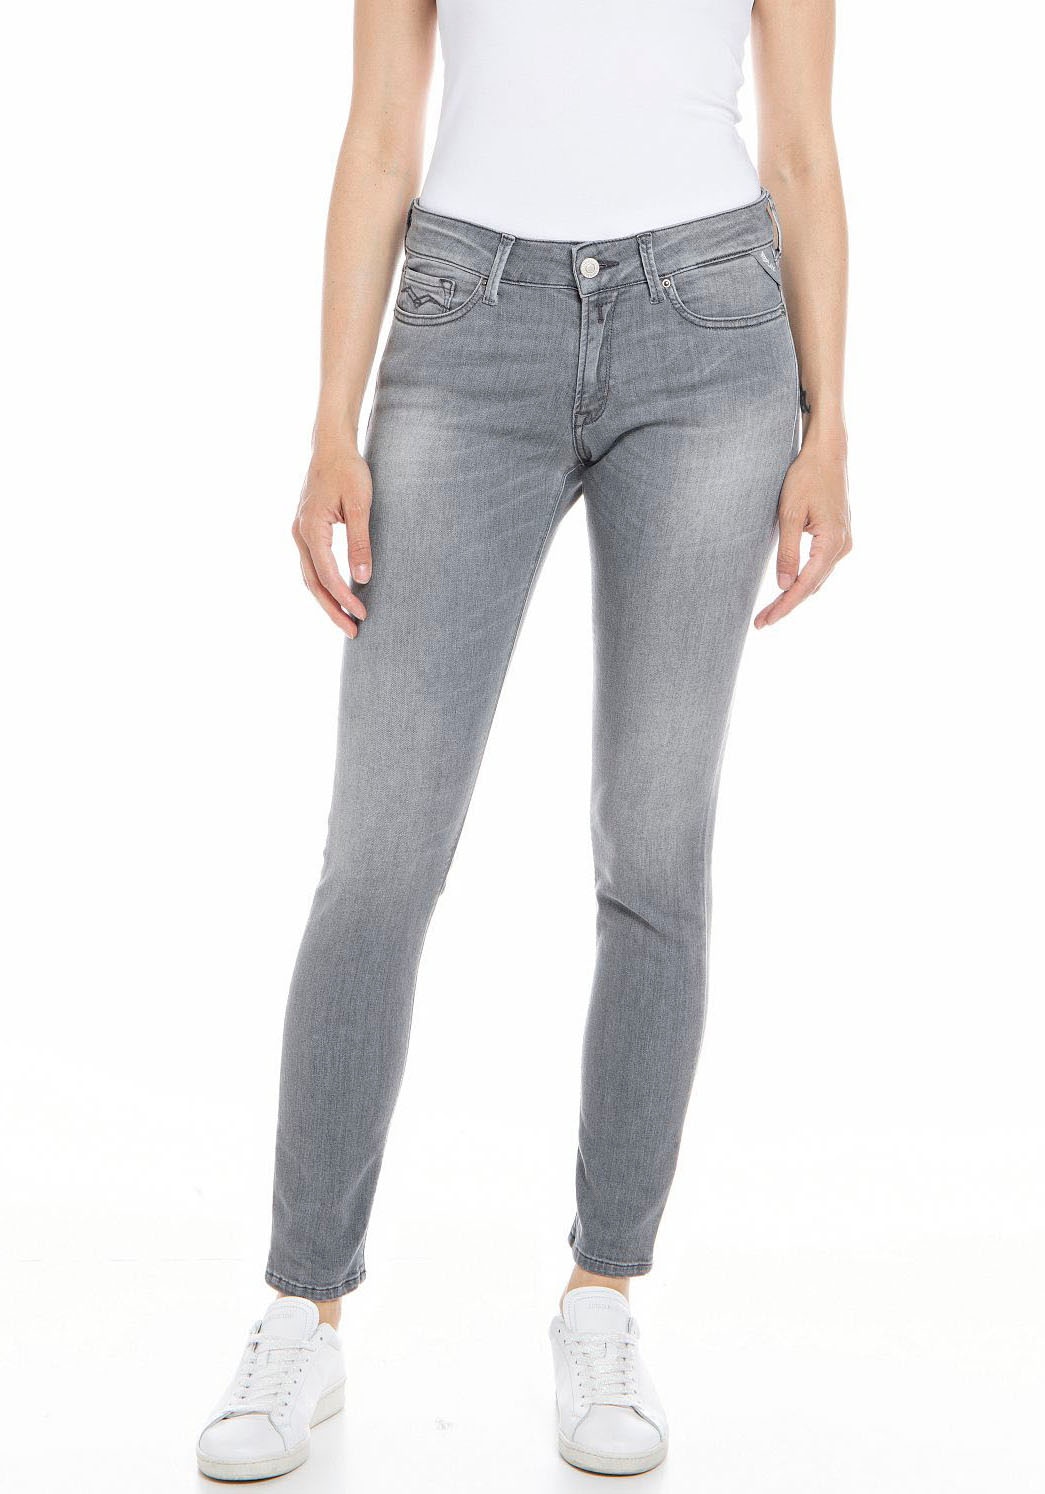 online »NEW in LUZ«, Ankle-Länge kaufen Replay Skinny-fit-Jeans